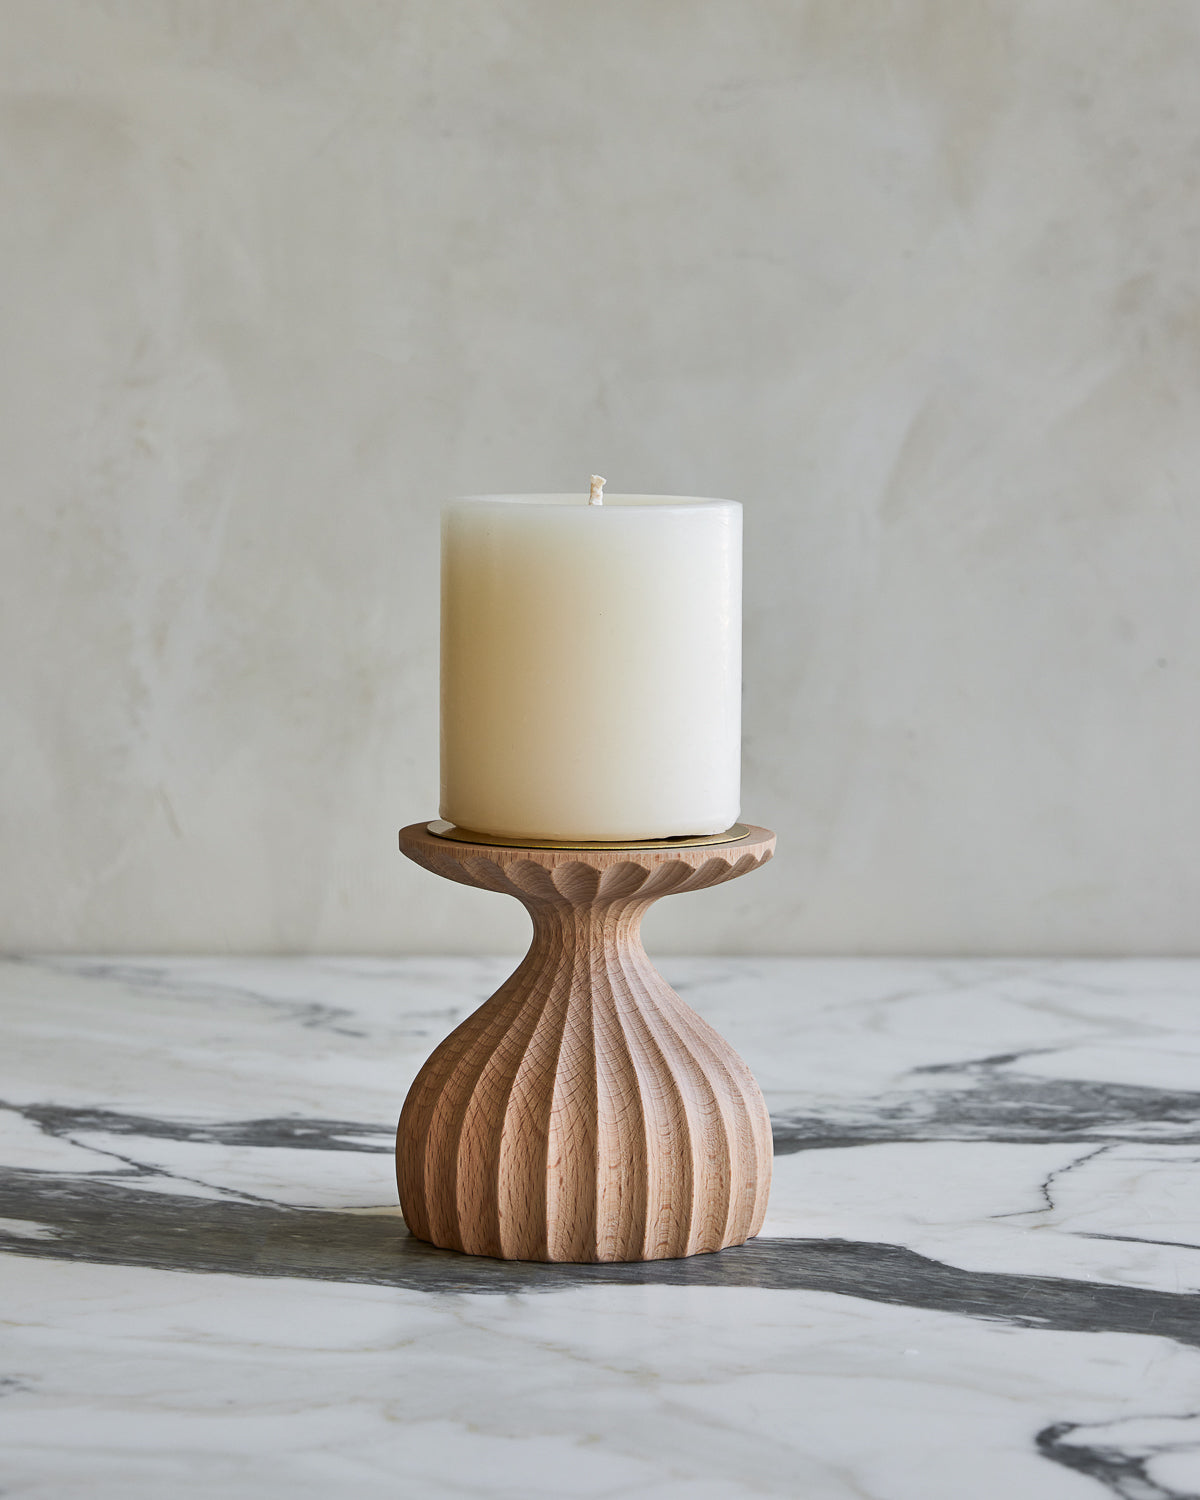 Short grooved natural maple wooden pillar candle holder with brass accents with white pillar candle